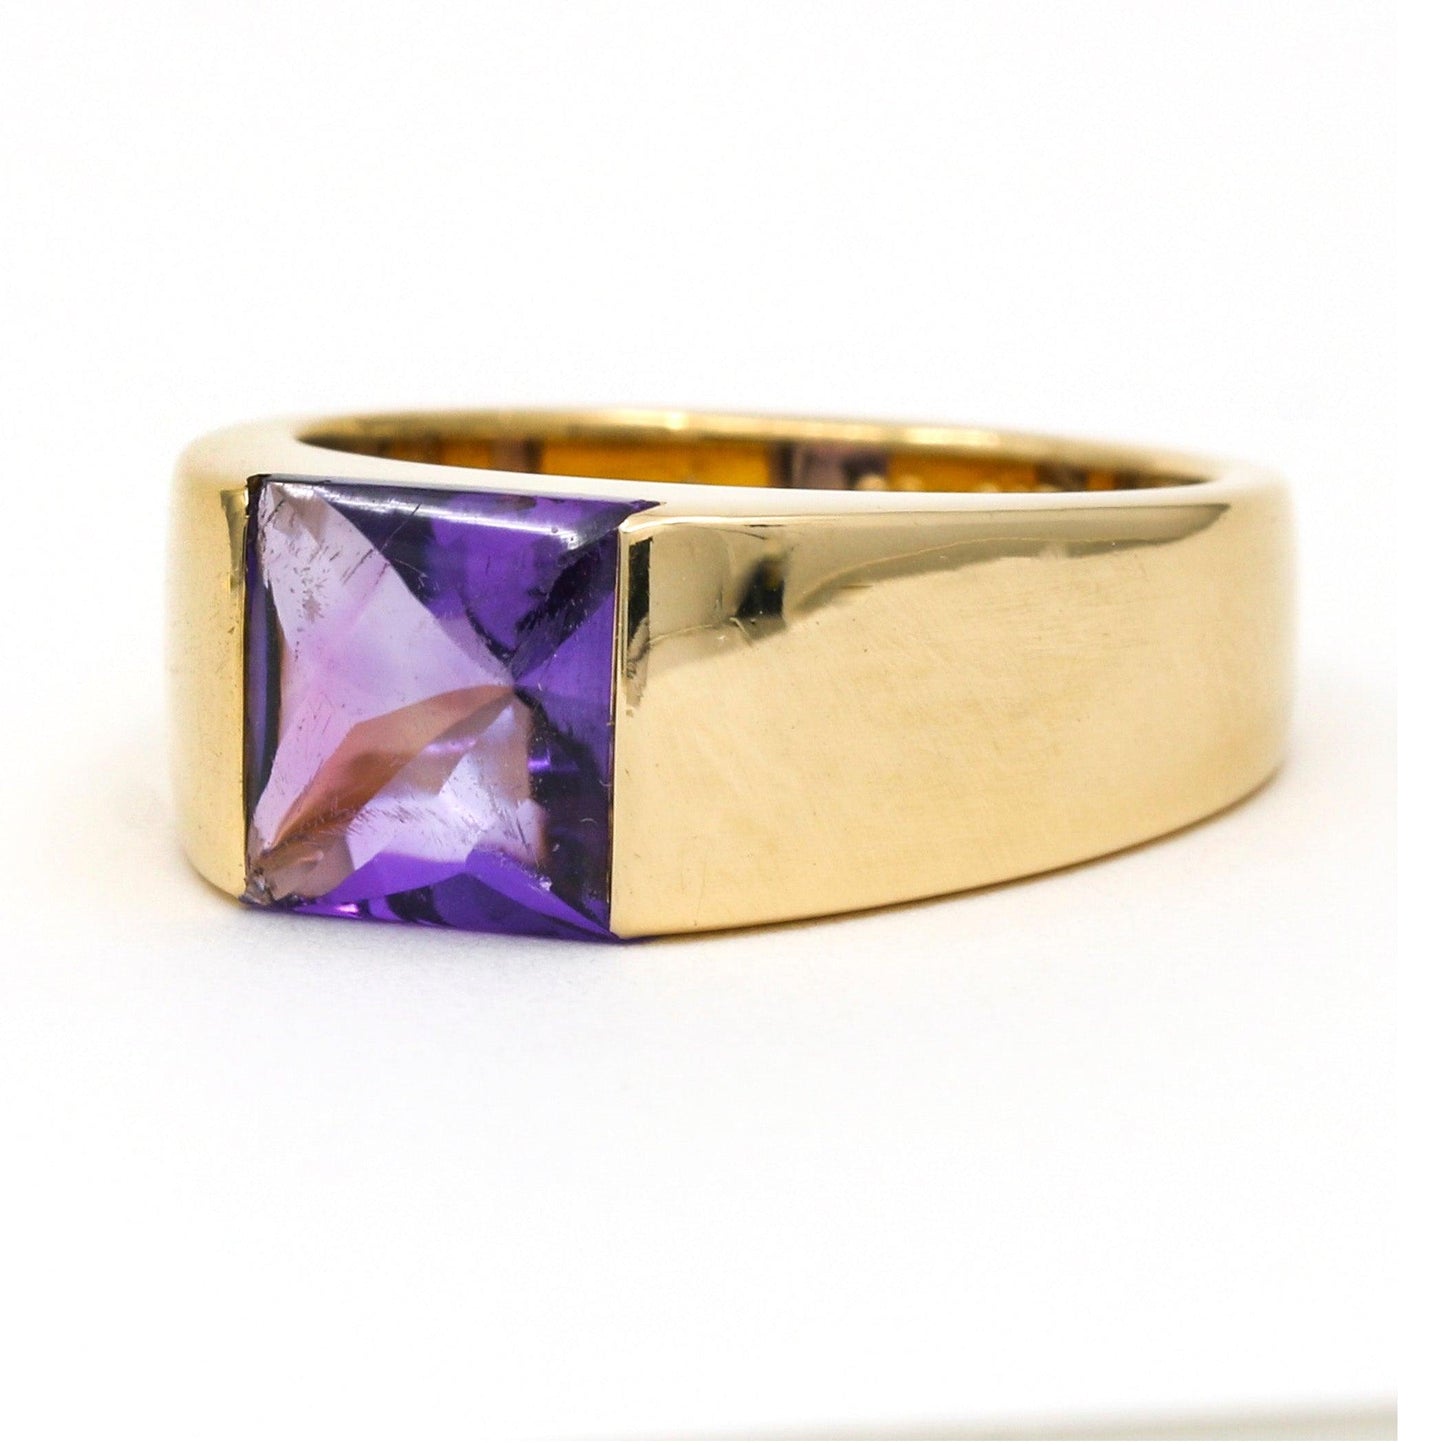 Women's Cartier Tank Large Amethyst Ring in 18k Yellow Gold - 31 Jewels Inc.